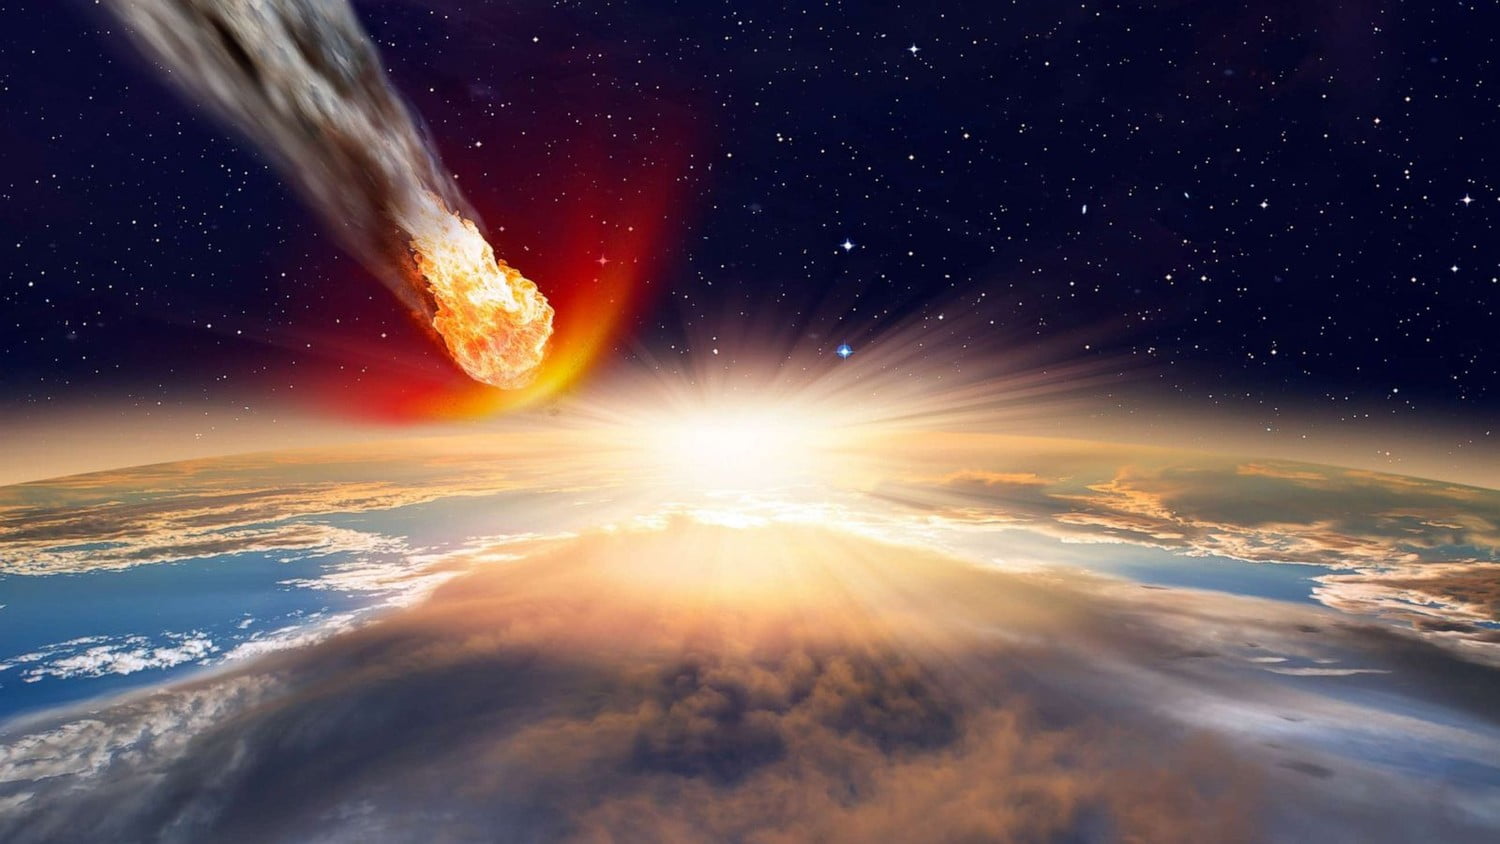 On March 2 an asteroid with a diameter of 70 meters may fall to Earth